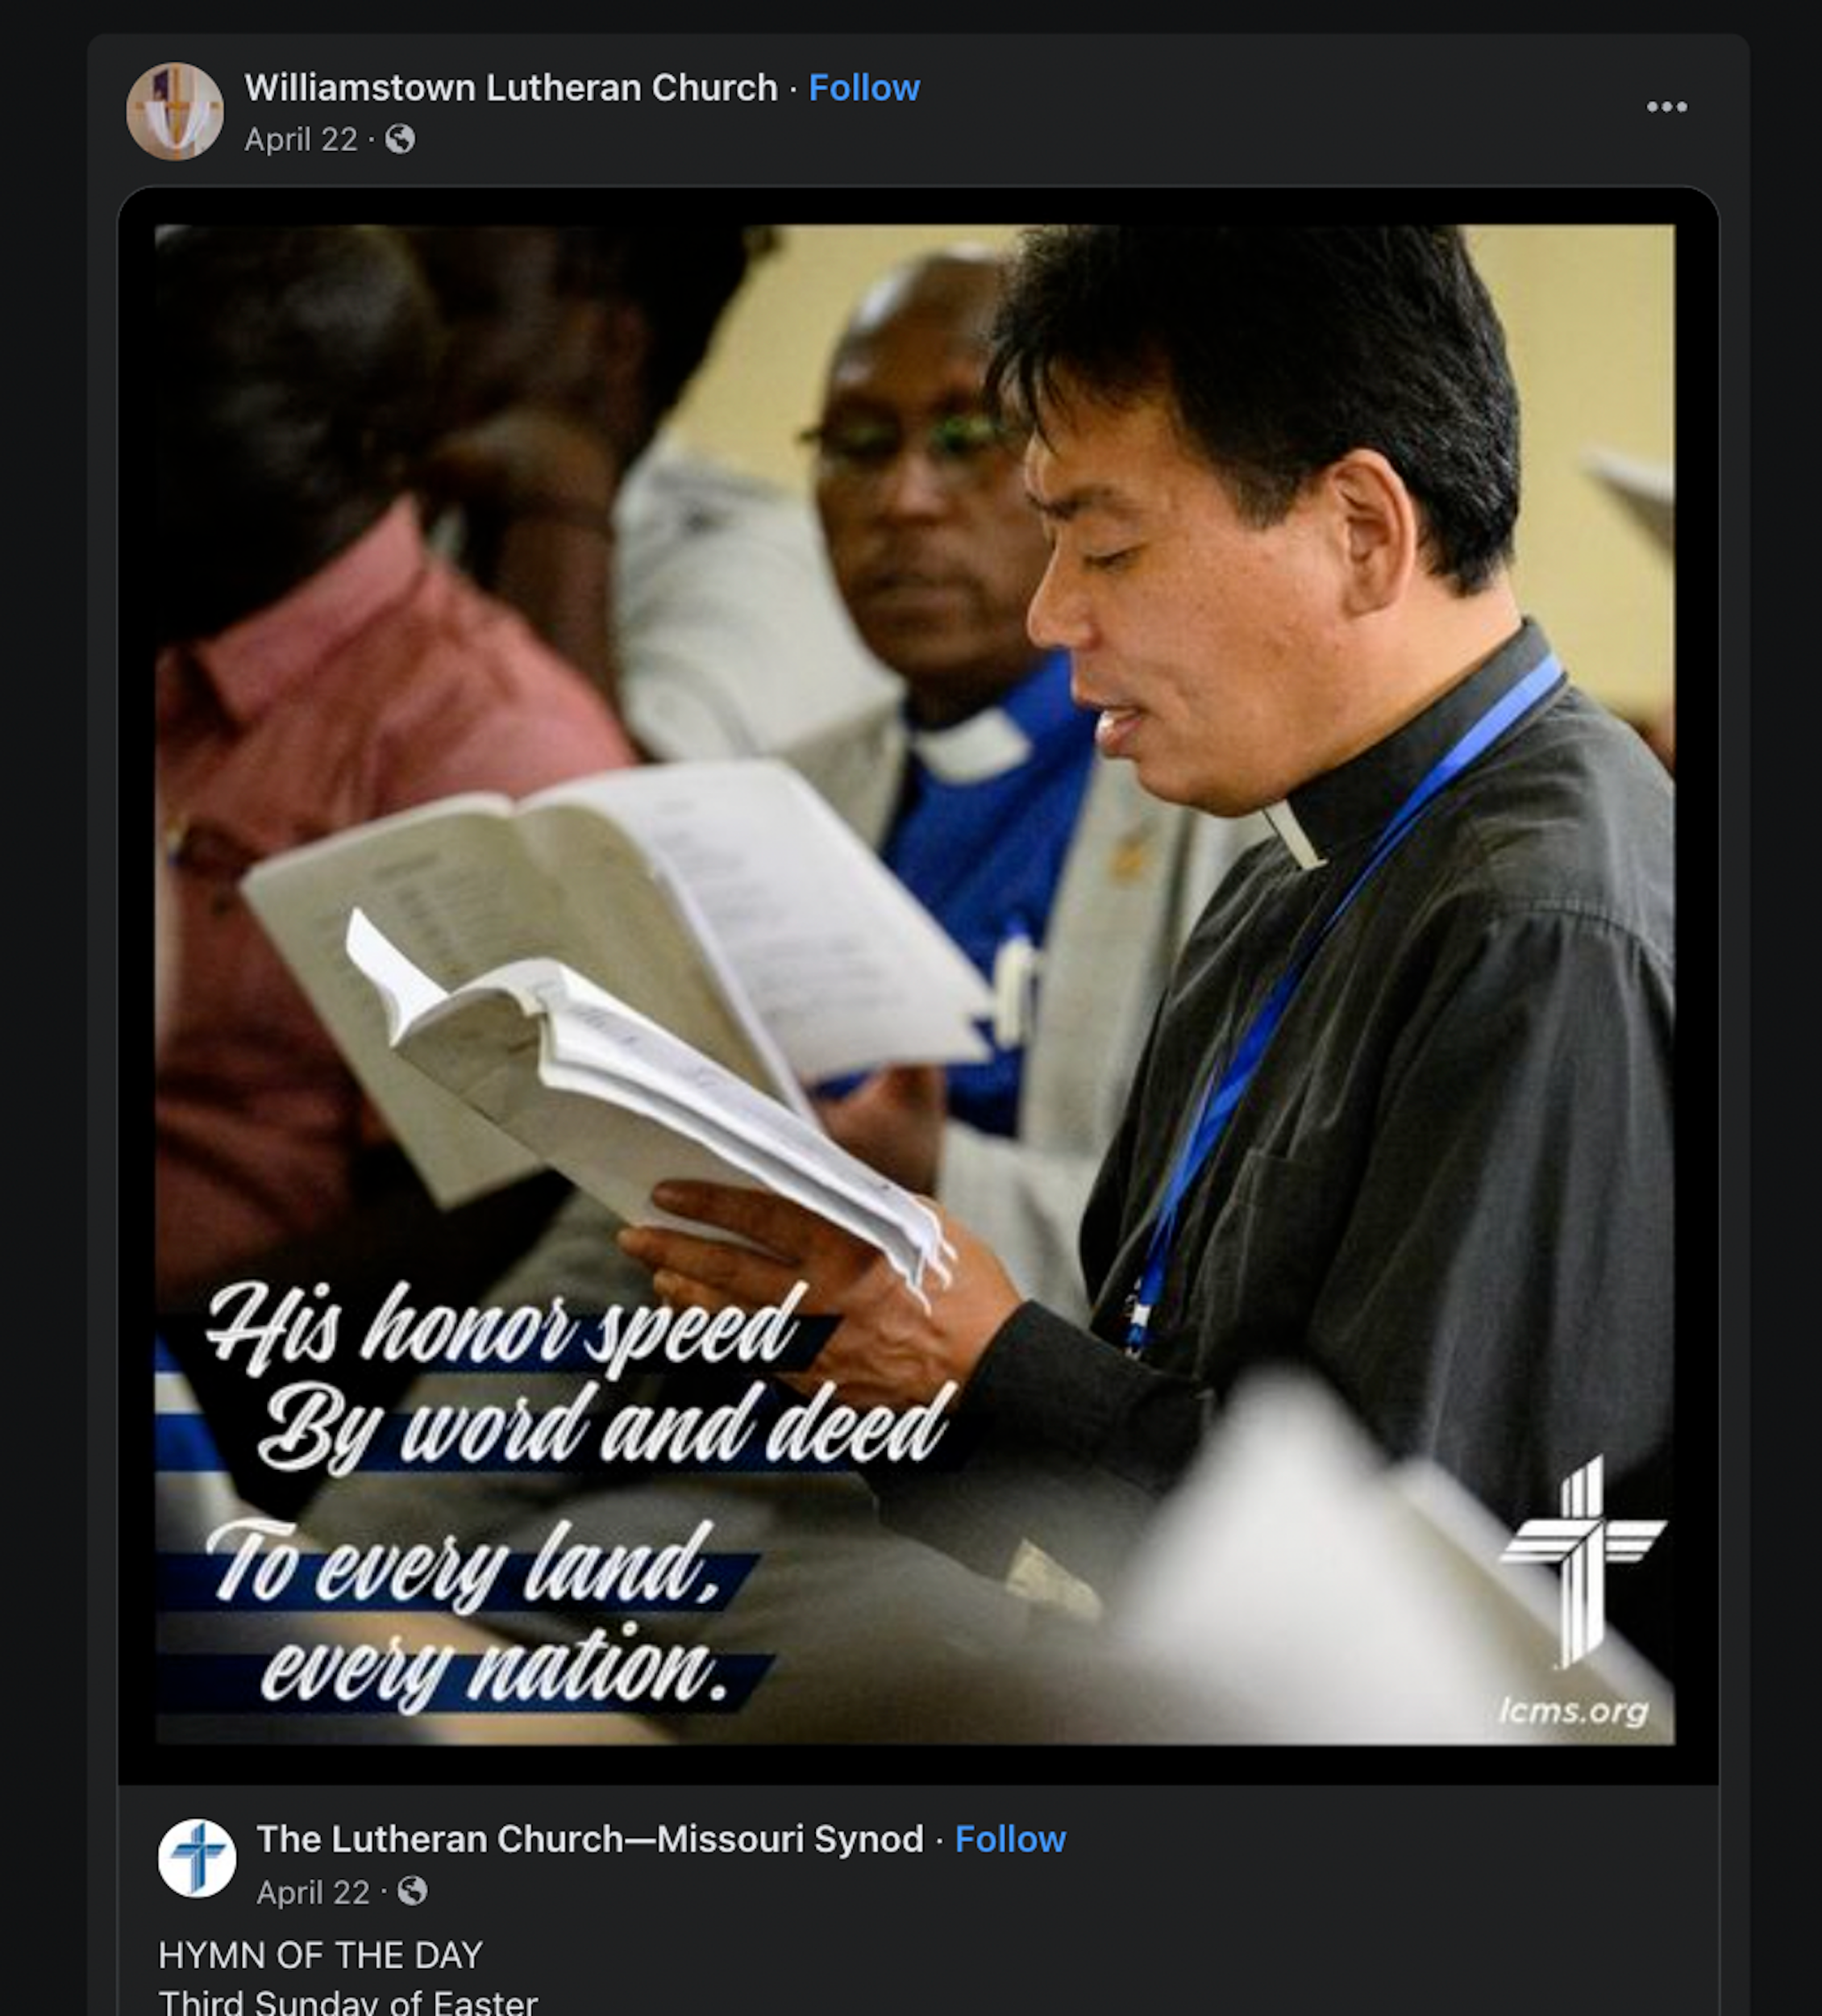 Facebook post by Williamstown Lutheran Church. Reposts an official LCMS post for the Third Sunday of Easter featuring text, "His honor speed/By word and deed/To every land, every nation." Pictured: an Asian pastor in a collar, a Black pastor in a collar, and out of focus Black worshippers in background. All singing from a program in congregation